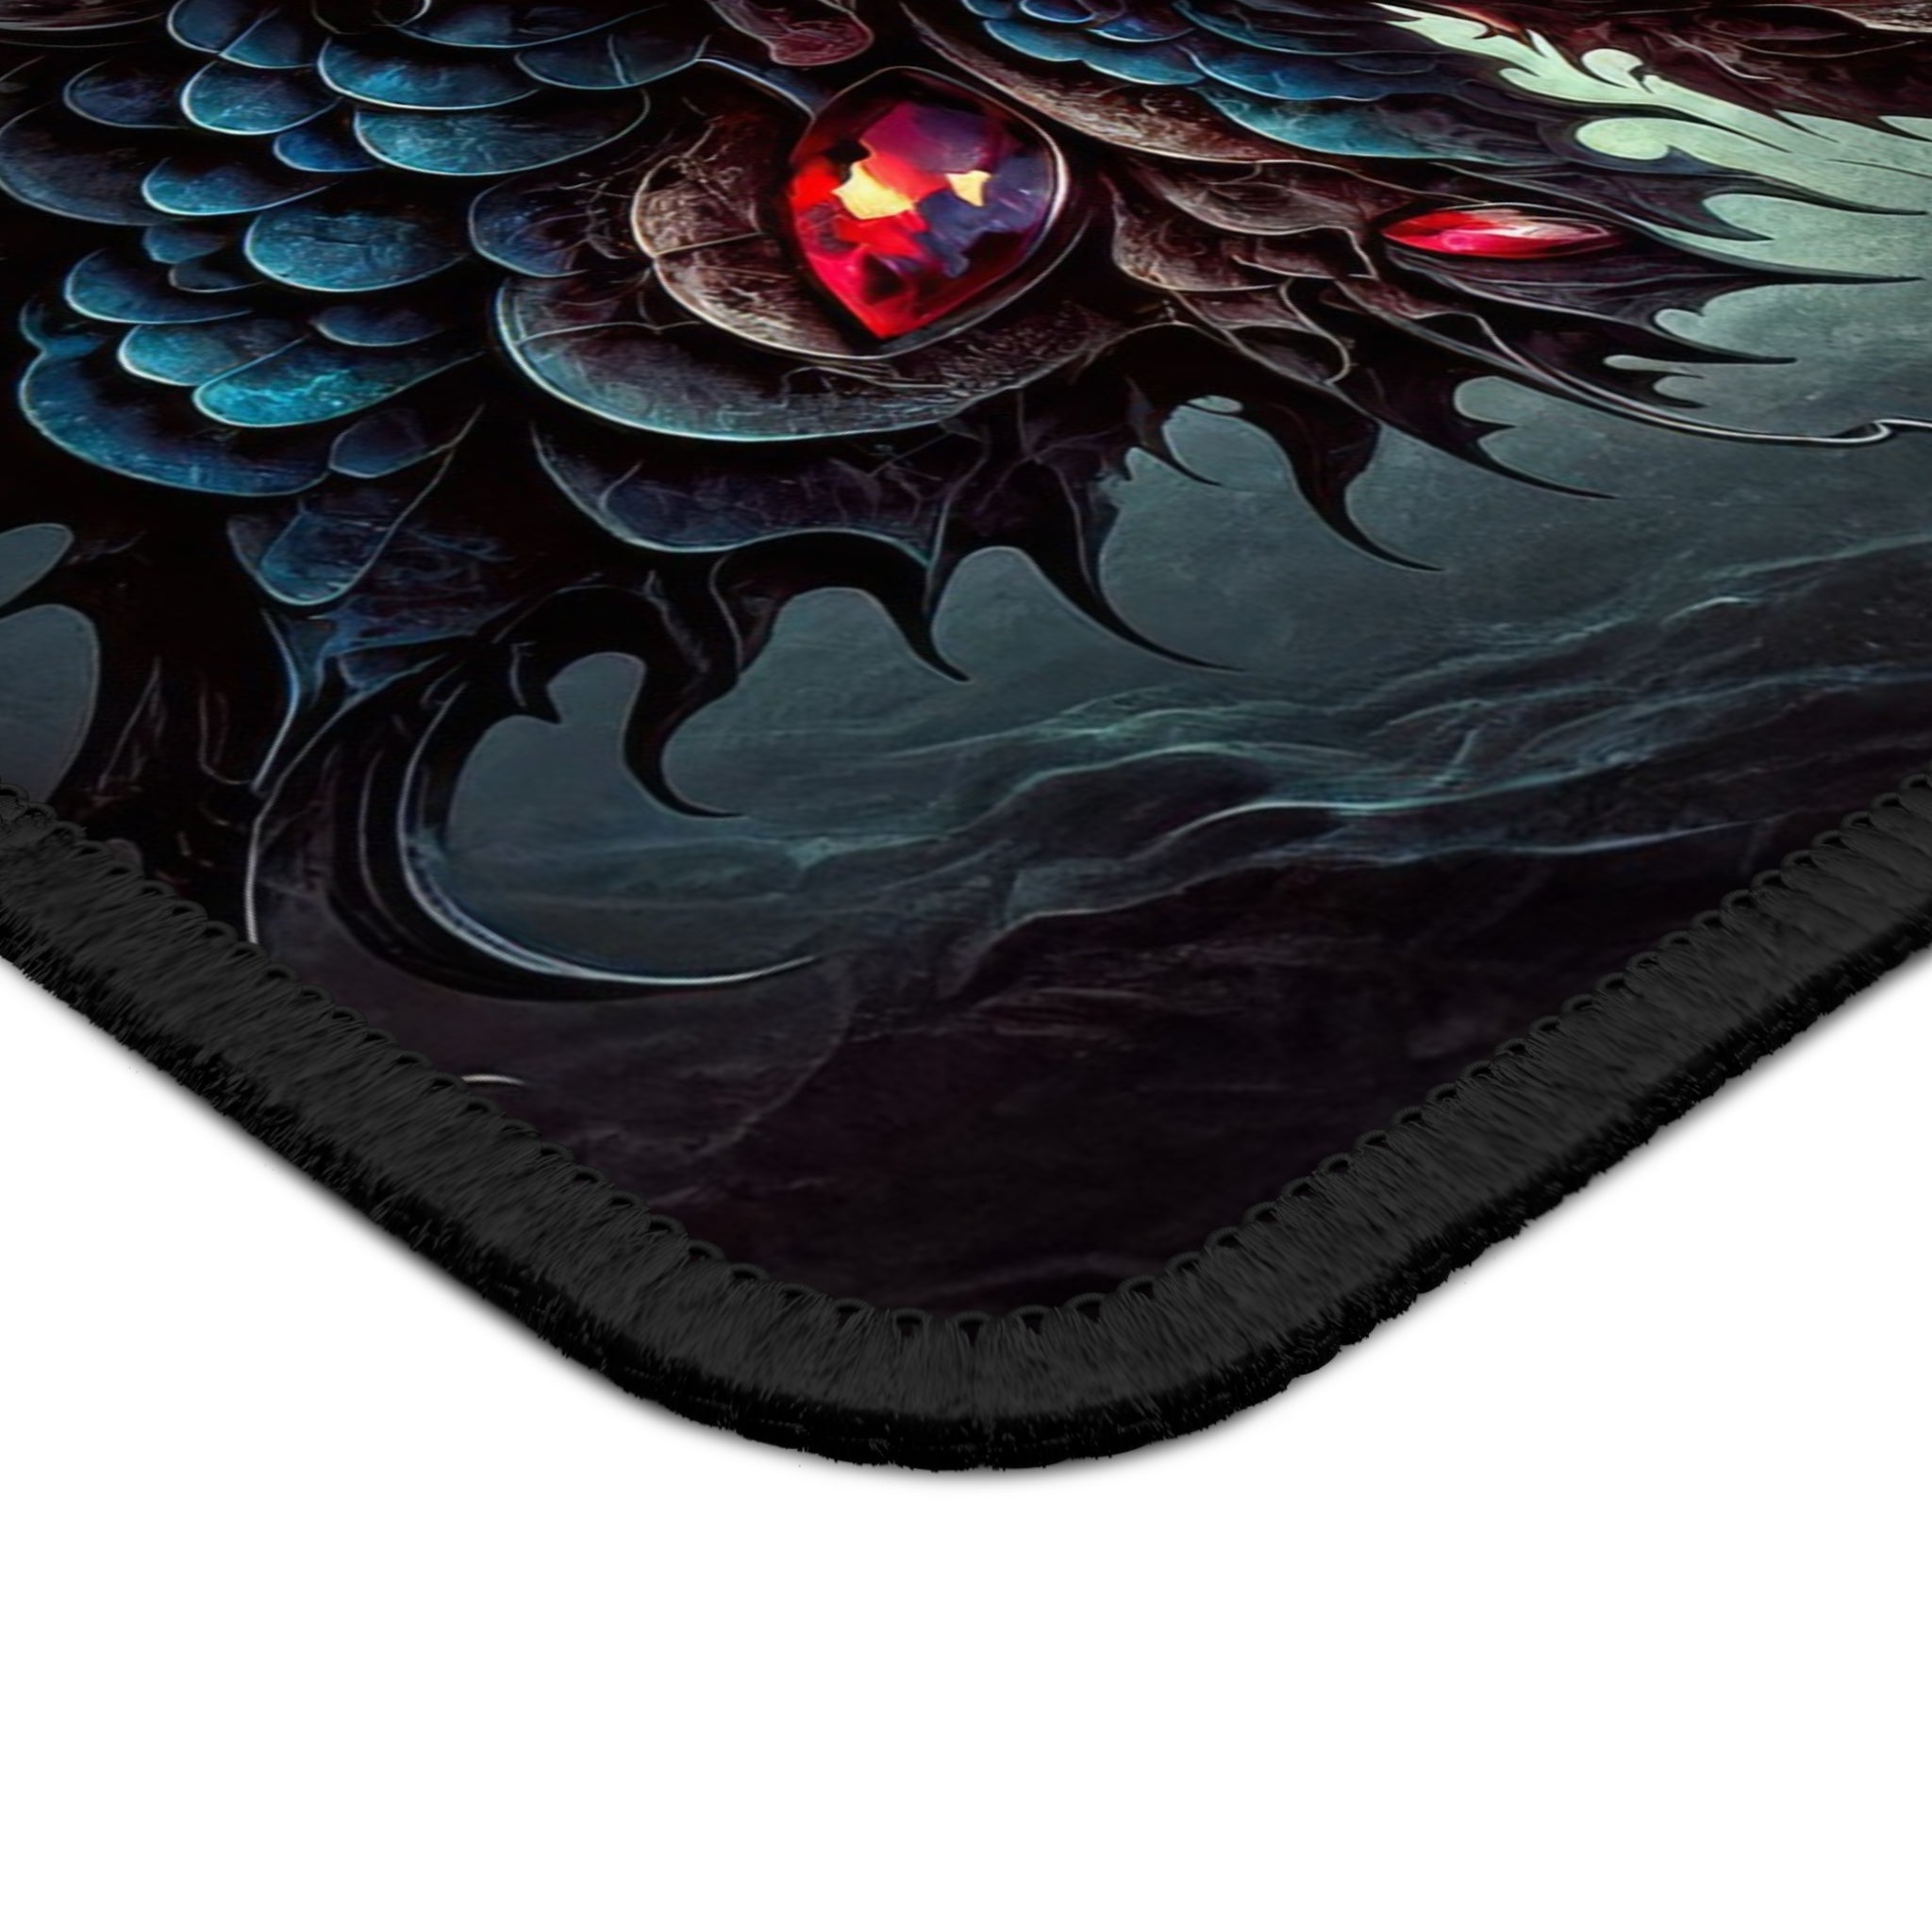 Veil of the Seraphim Mouse Pad